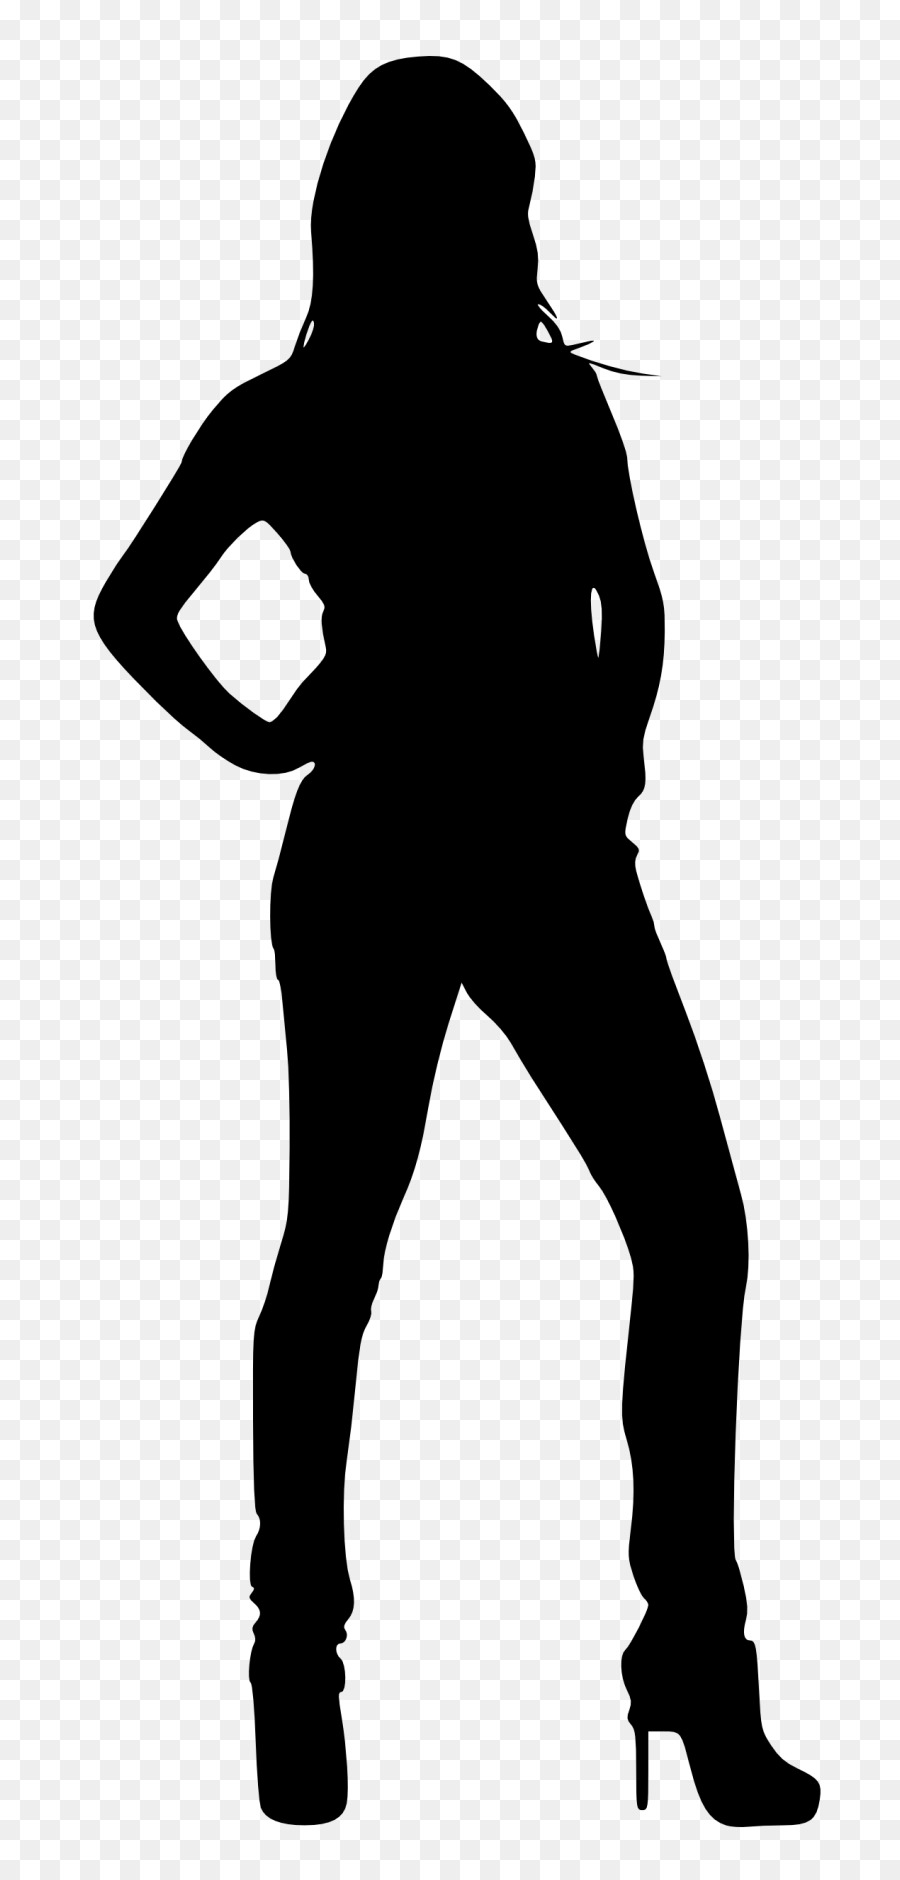 Silhouette Woman Clip art - Silhouette png download - 768*1871 - Free Transparent Silhouette png Download.